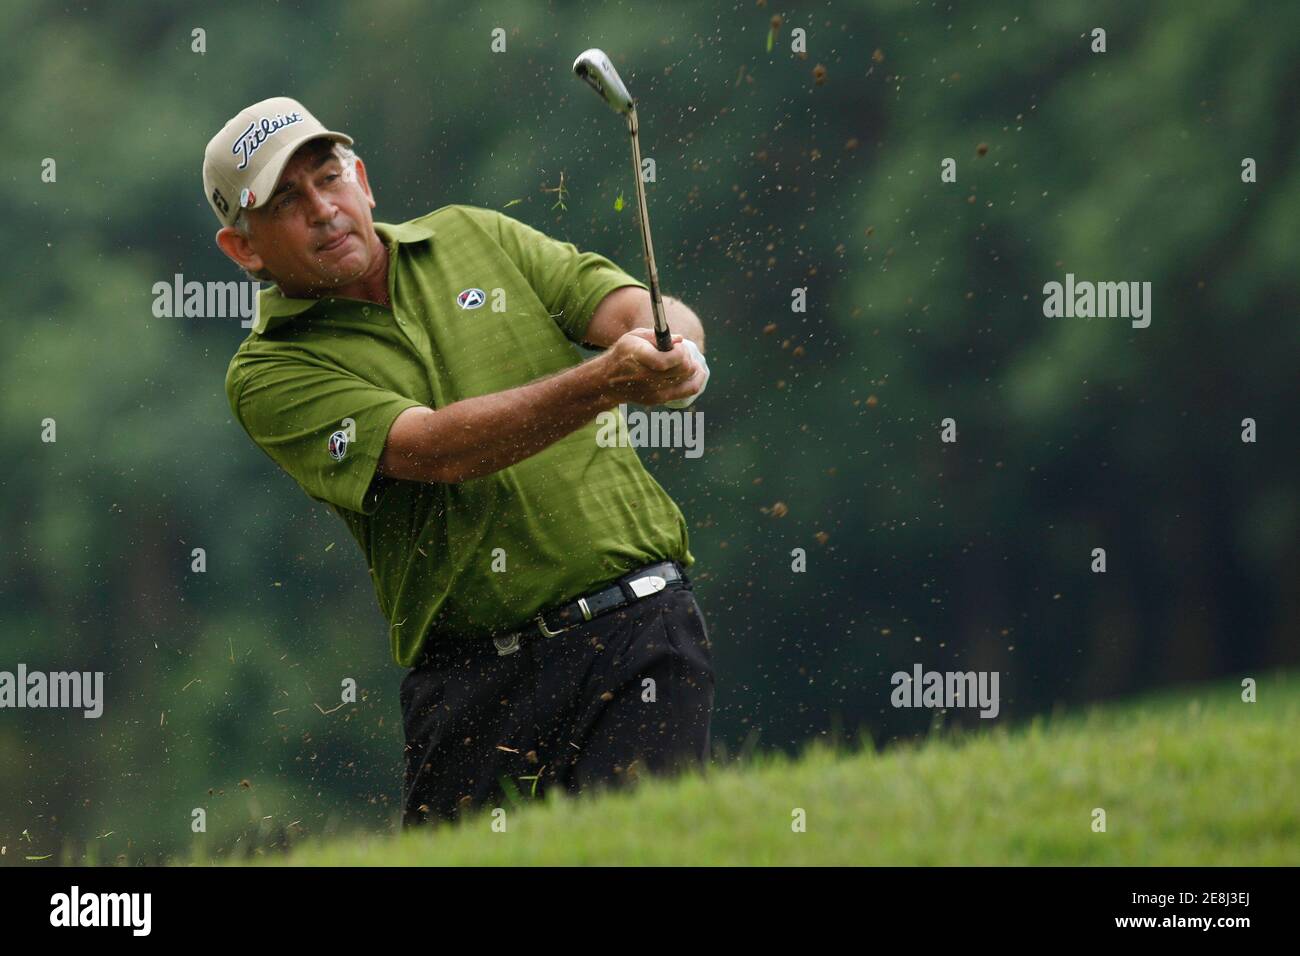 Hendrik Buhrmann of South Africa hits a shot on the sixth fairway during the second day of the Hong Kong Open golf tournament November 13,2009     REUTERS/Tyrone Siu    (CHINA POLITICS SPORT GOLF) Stock Photo